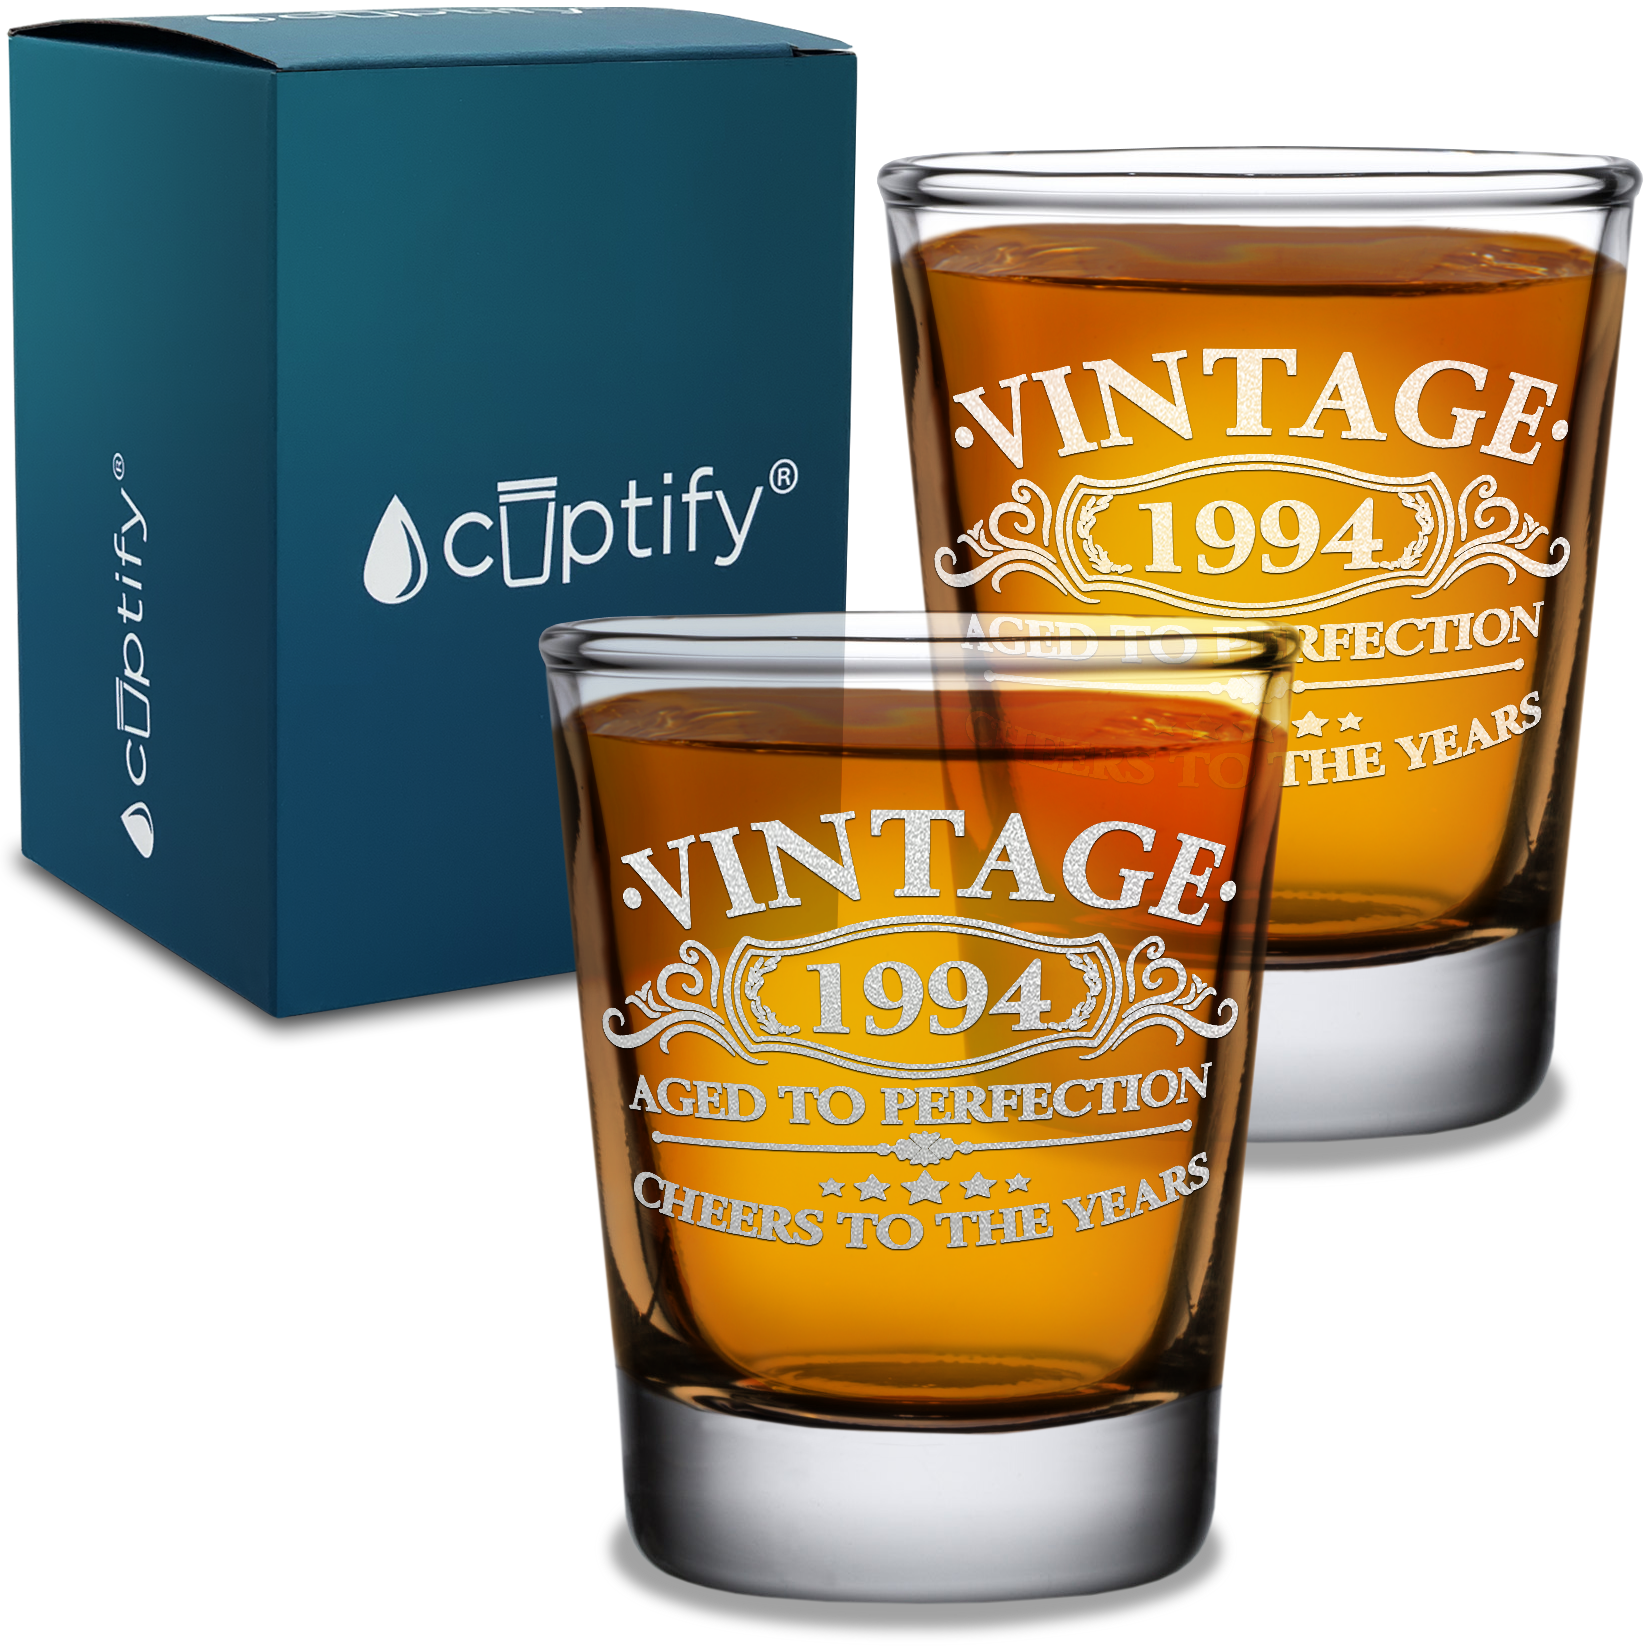 Vintage Aged To Perfection Cheers To 27 Years 1994 Laser Engraved on 2oz Shot Glasses - Set of 2